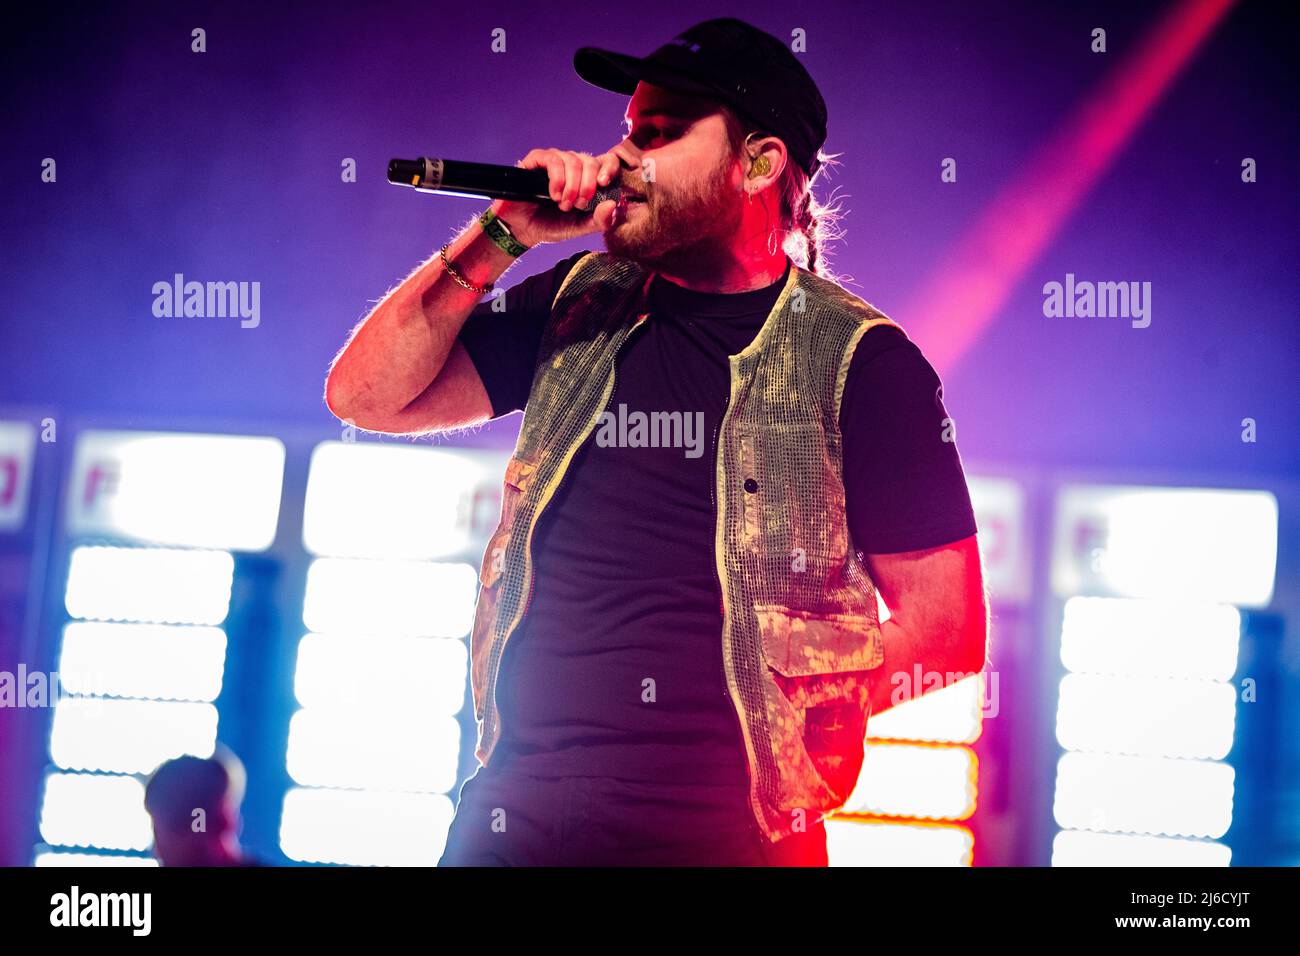 2022-04-30 19:36:23 AMSTERDAM - Rapper Donnie during his concert in AFAS Live. The rapper was later joined during the performance by guest artists such as Rene Froger, Frans Duijts, Willie Wartaal and Vjèze Fur. ANP PAUL BERGEN netherlands out - belgium out Stock Photo